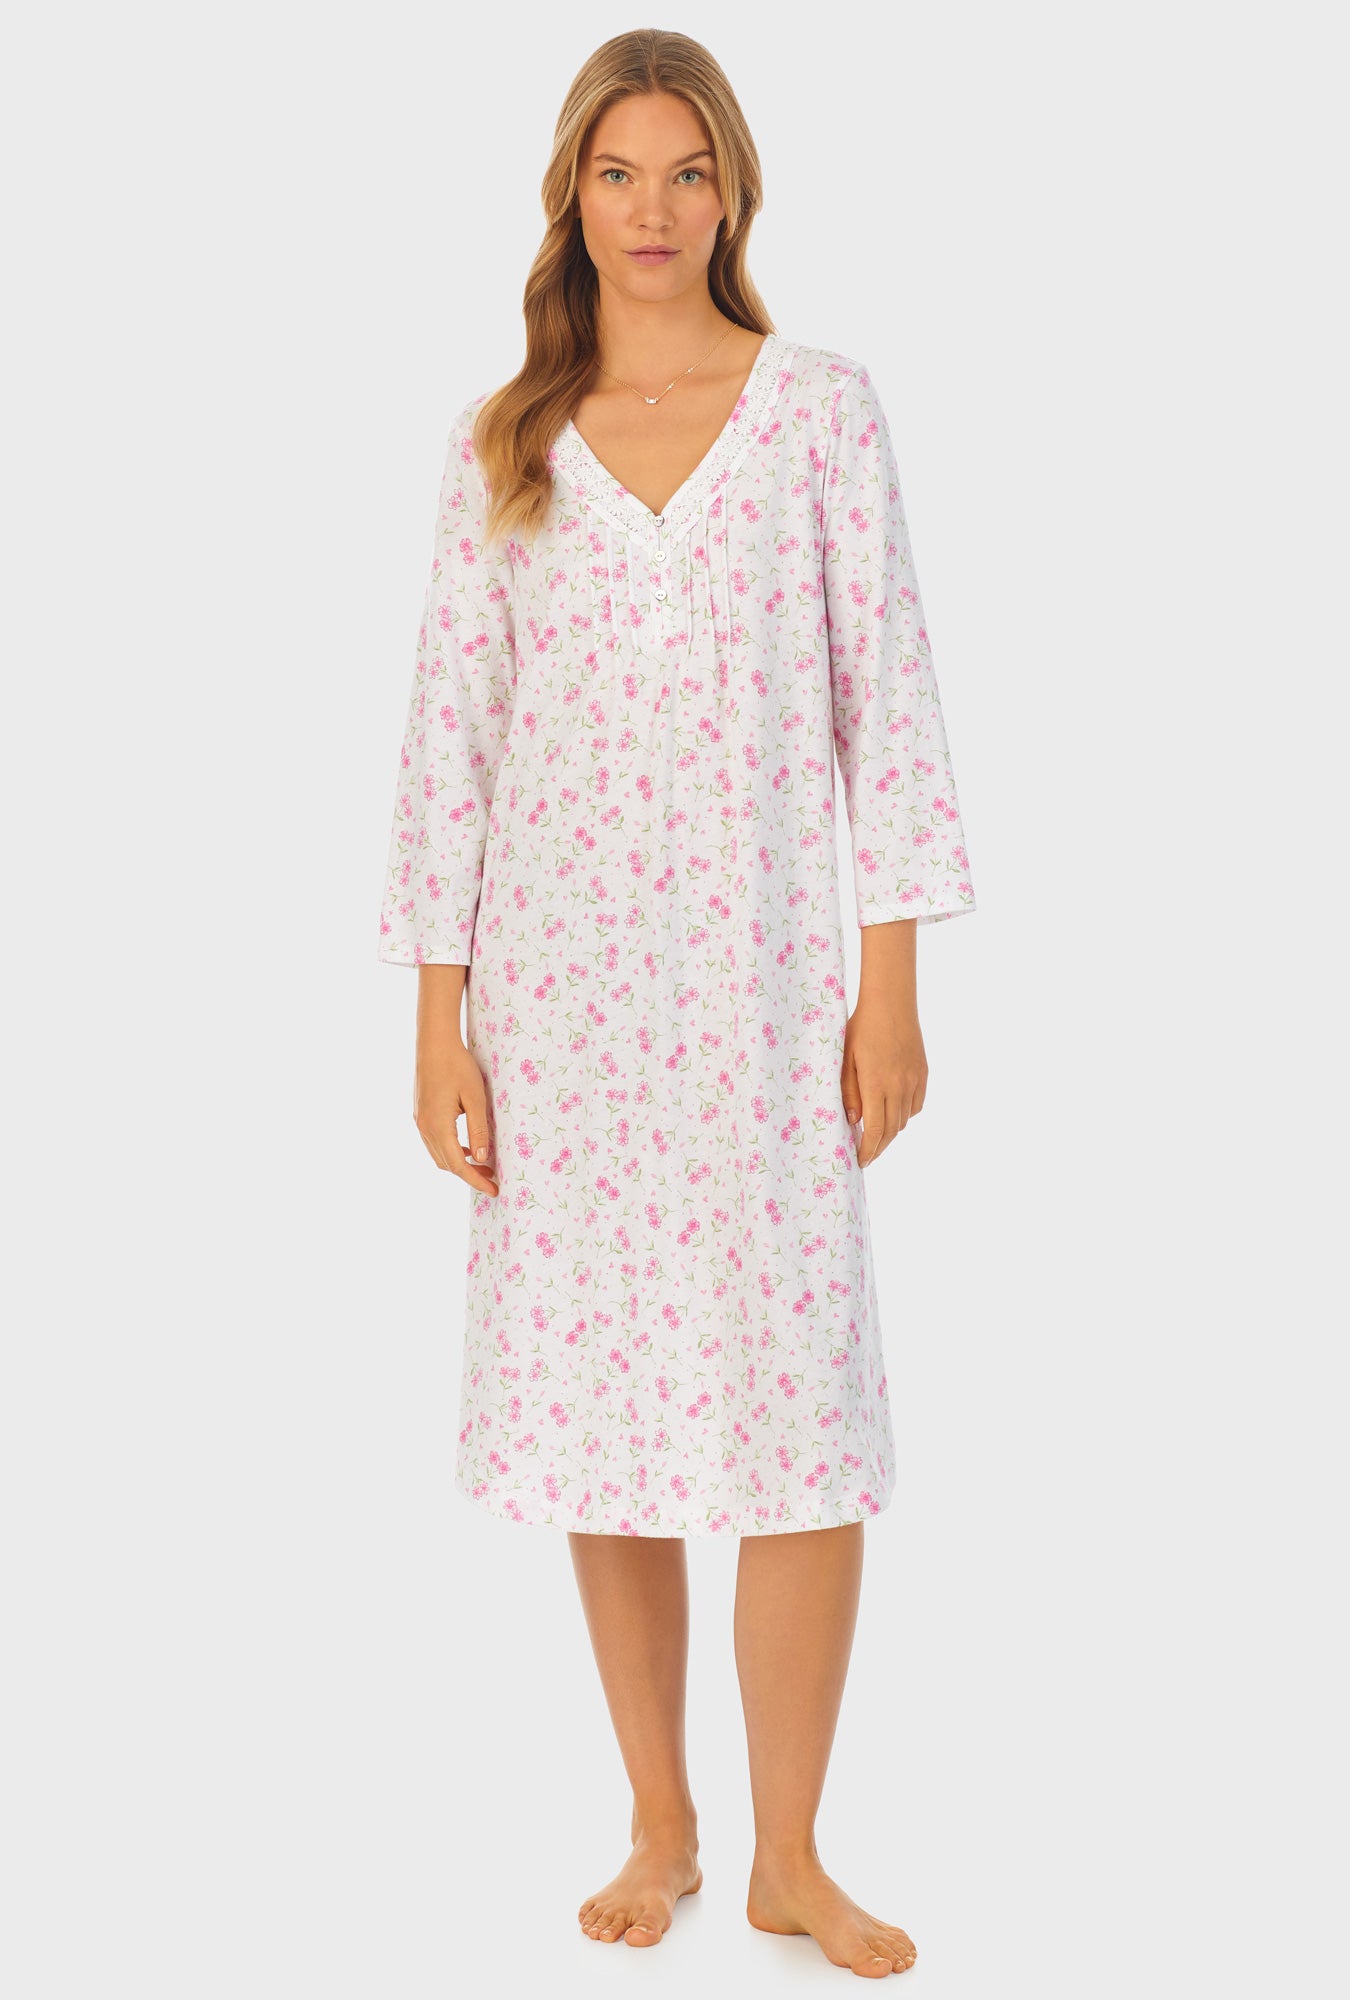 A lady wearing white quarter sleeve cotton waltz nightgown with blooming heart print.